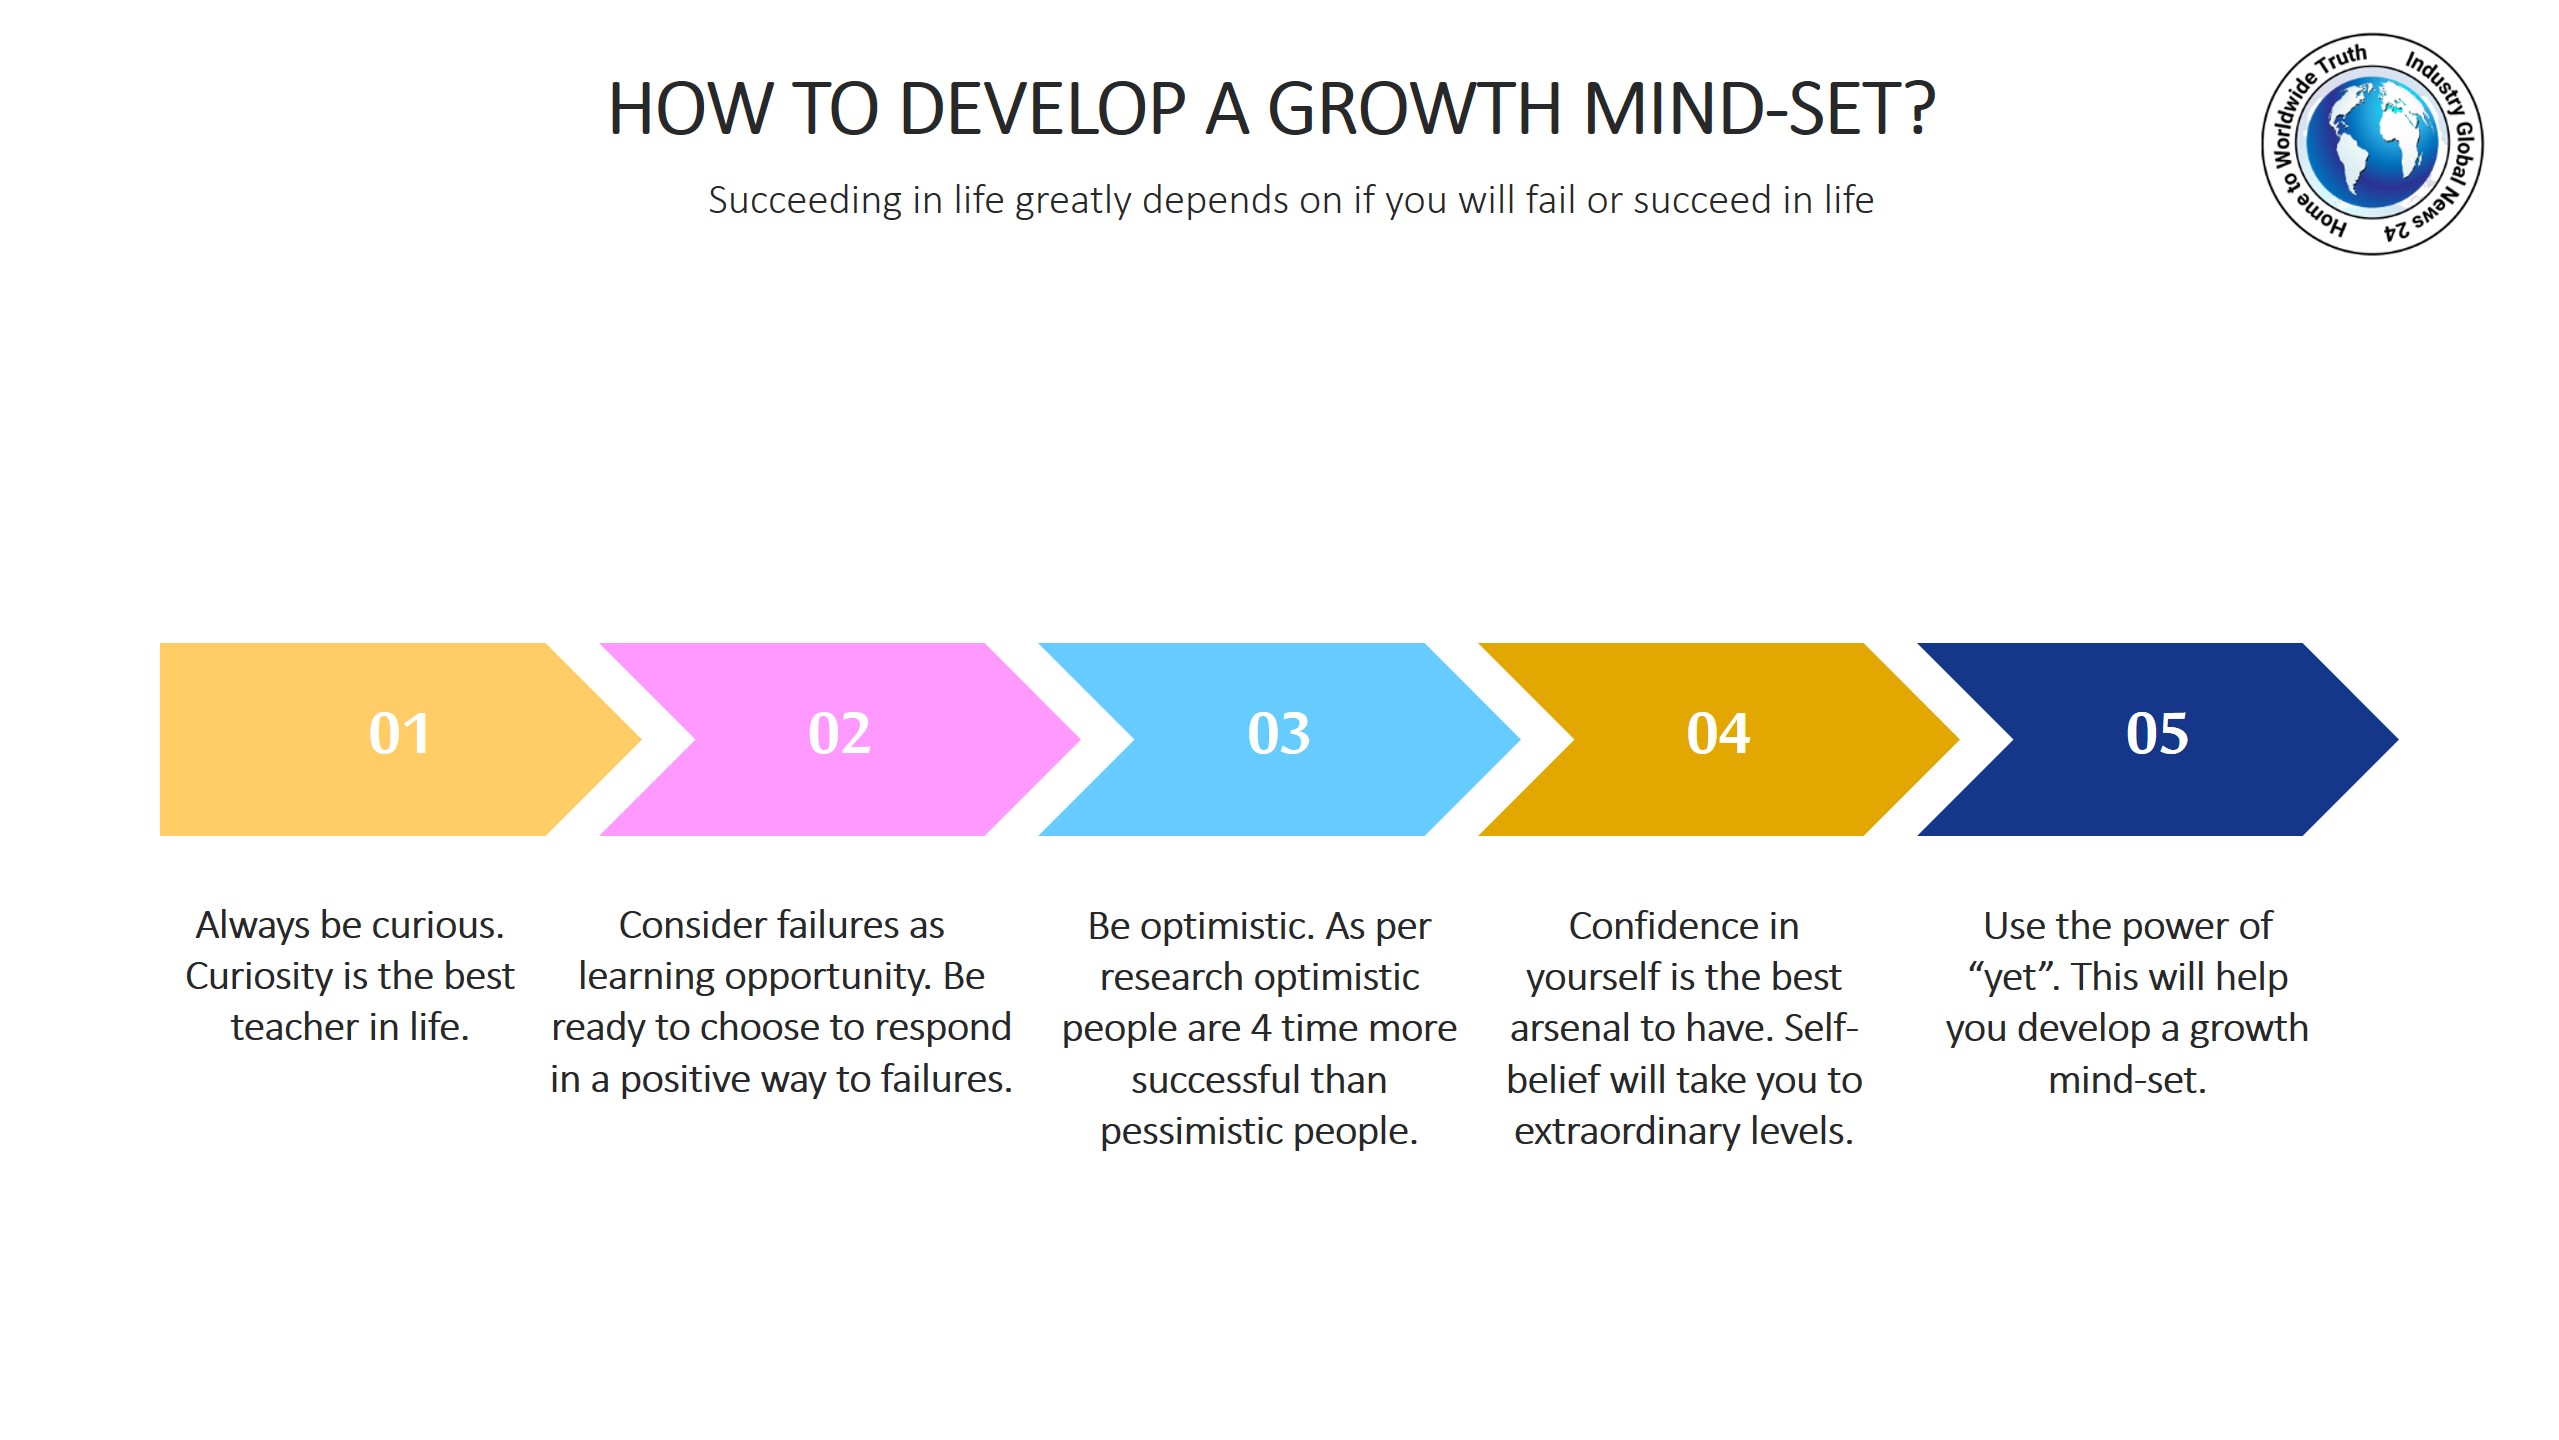 How to develop a growth mind-set